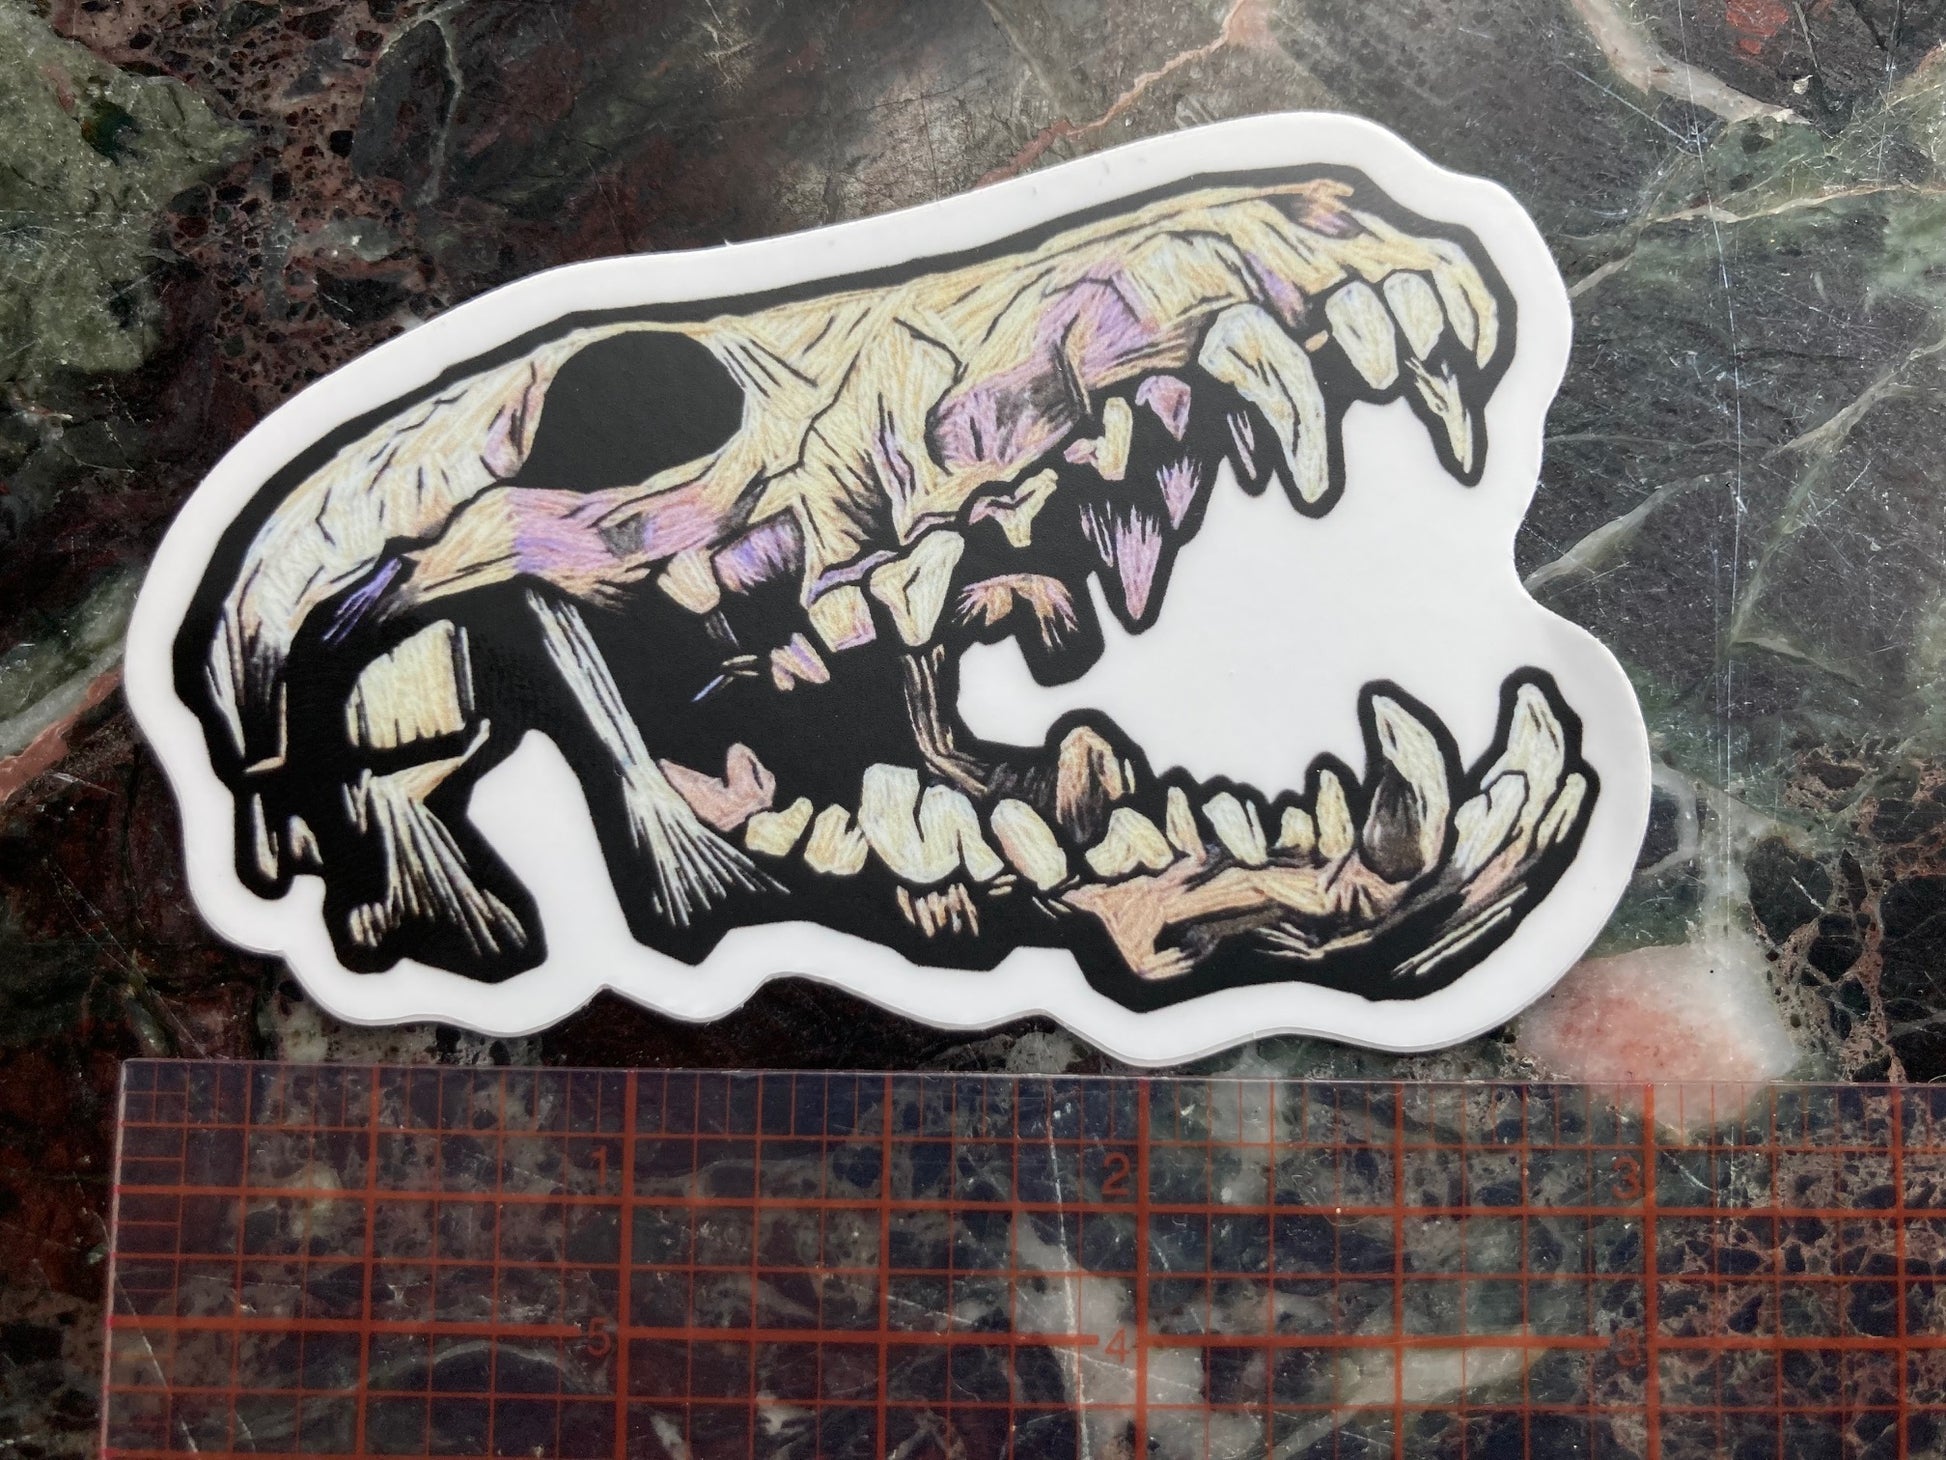 a sticker depicting an embroidered coyote skeleton with an open mouth and lots of teeth sits on a dark surface. The Embroidered skull is beige and lavender and black tones with lots of shadows. A visible ruler shows the sticker to be a little less than 3 inches long. 